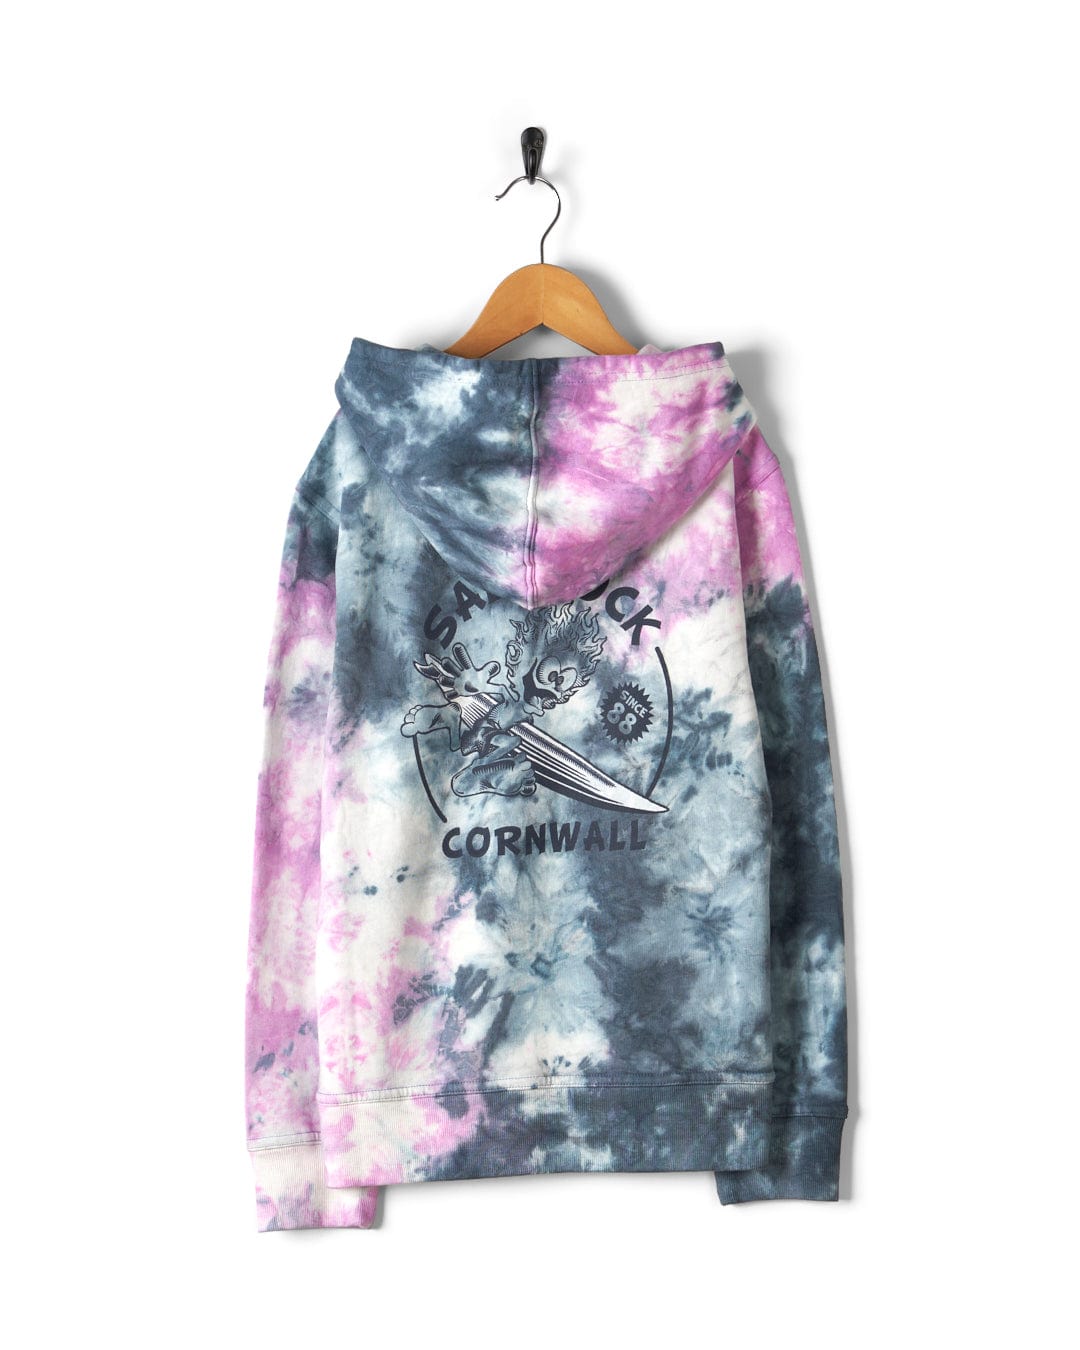 A cotton Wave Rider Cornwall - Kids Tie Dye Pop Hoodie in pink/grey with a pink and blue Saltrock Running Man design.